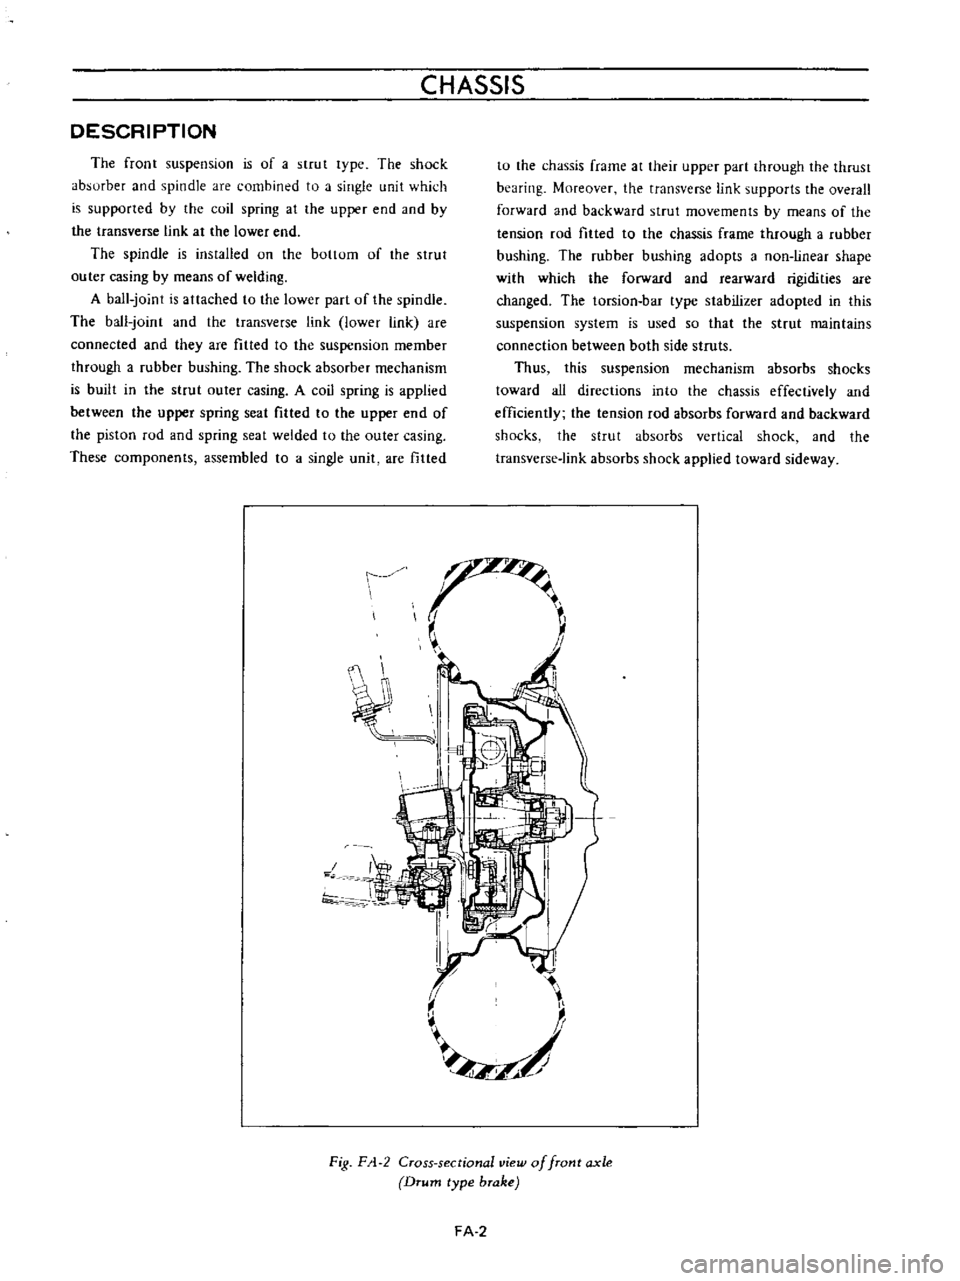 DATSUN B110 1973  Service Repair Manual 
CHASSIS

DESCRIPTION

The

front

suspension 
is 
of 
a 
strut

lype 
The 
shock

absurber

and

spindle 
are 
combined 
to 
a

single 
unit 
which

is

supported 
by 
the 
coil

spring 
at 
the

upp